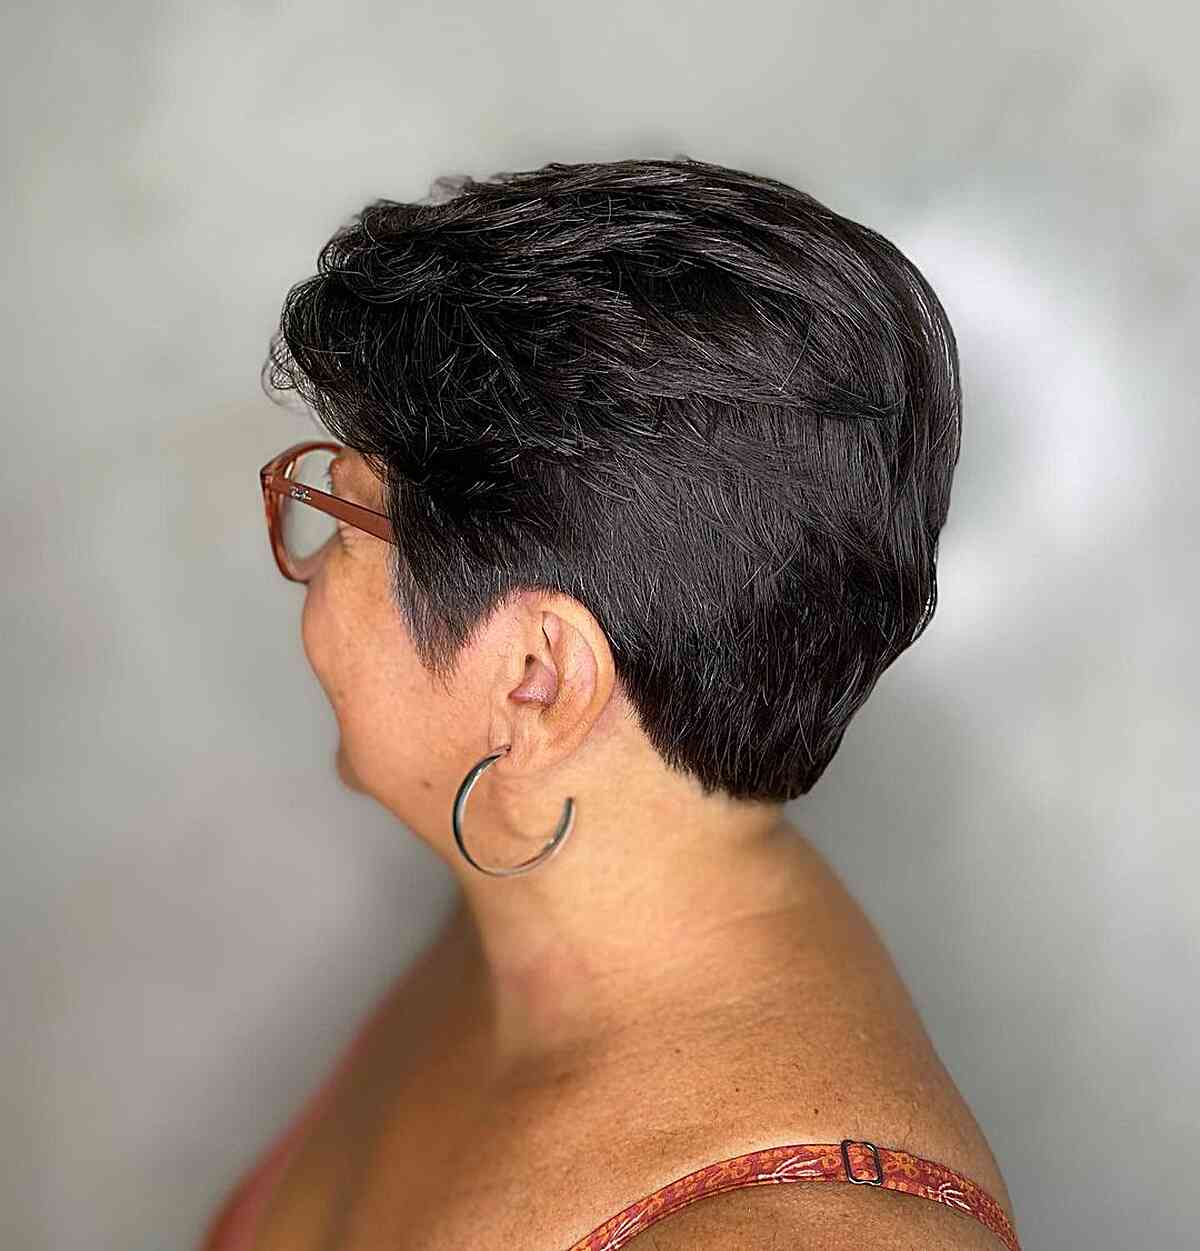 Black Feathered Pixie Haircut for Ladies turning 60 wearing glasses